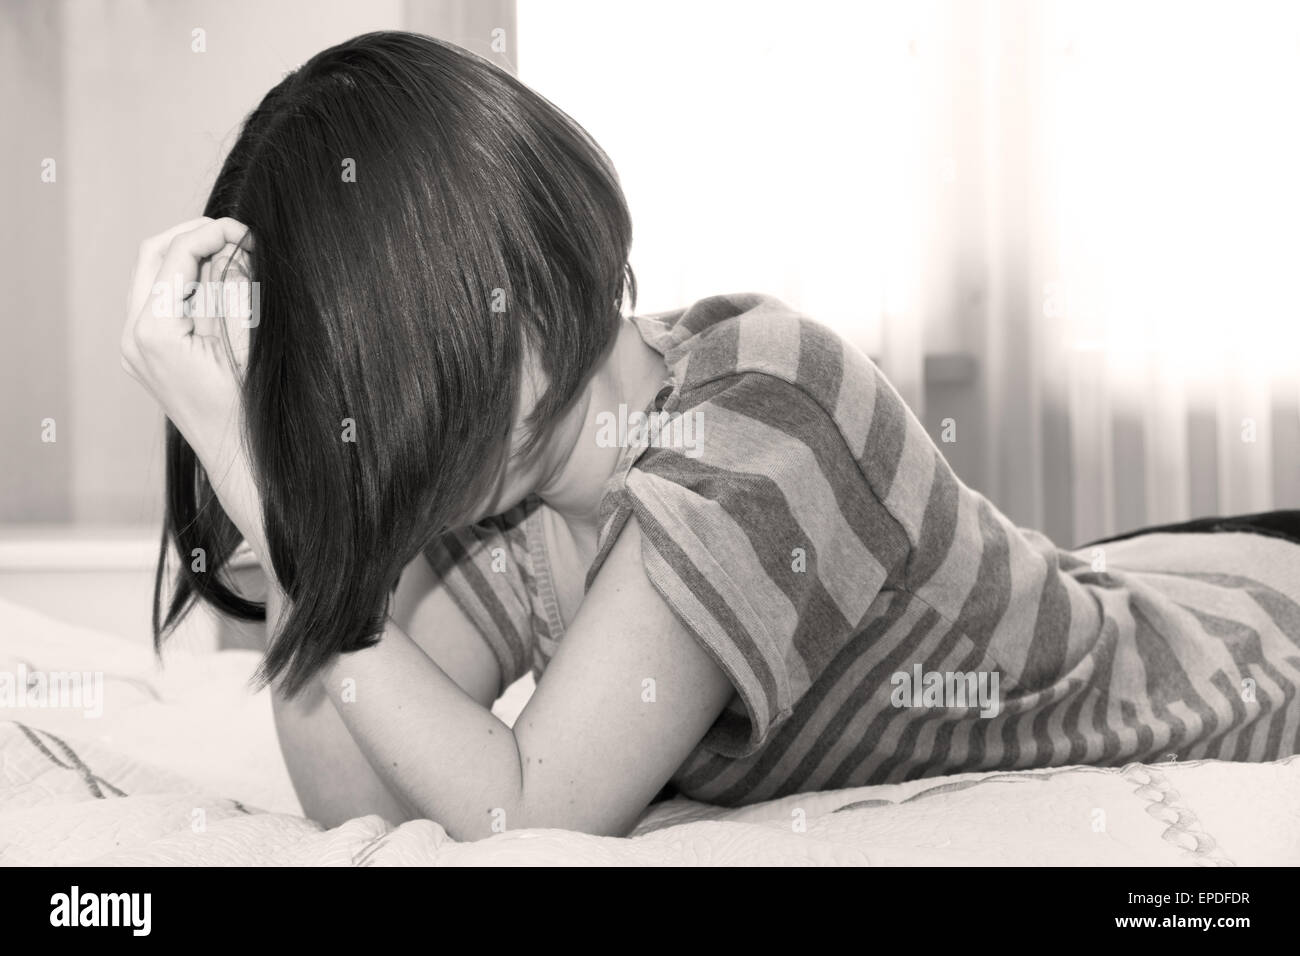 Young lonely depressed scared woman crying on the bed. Stock Photo